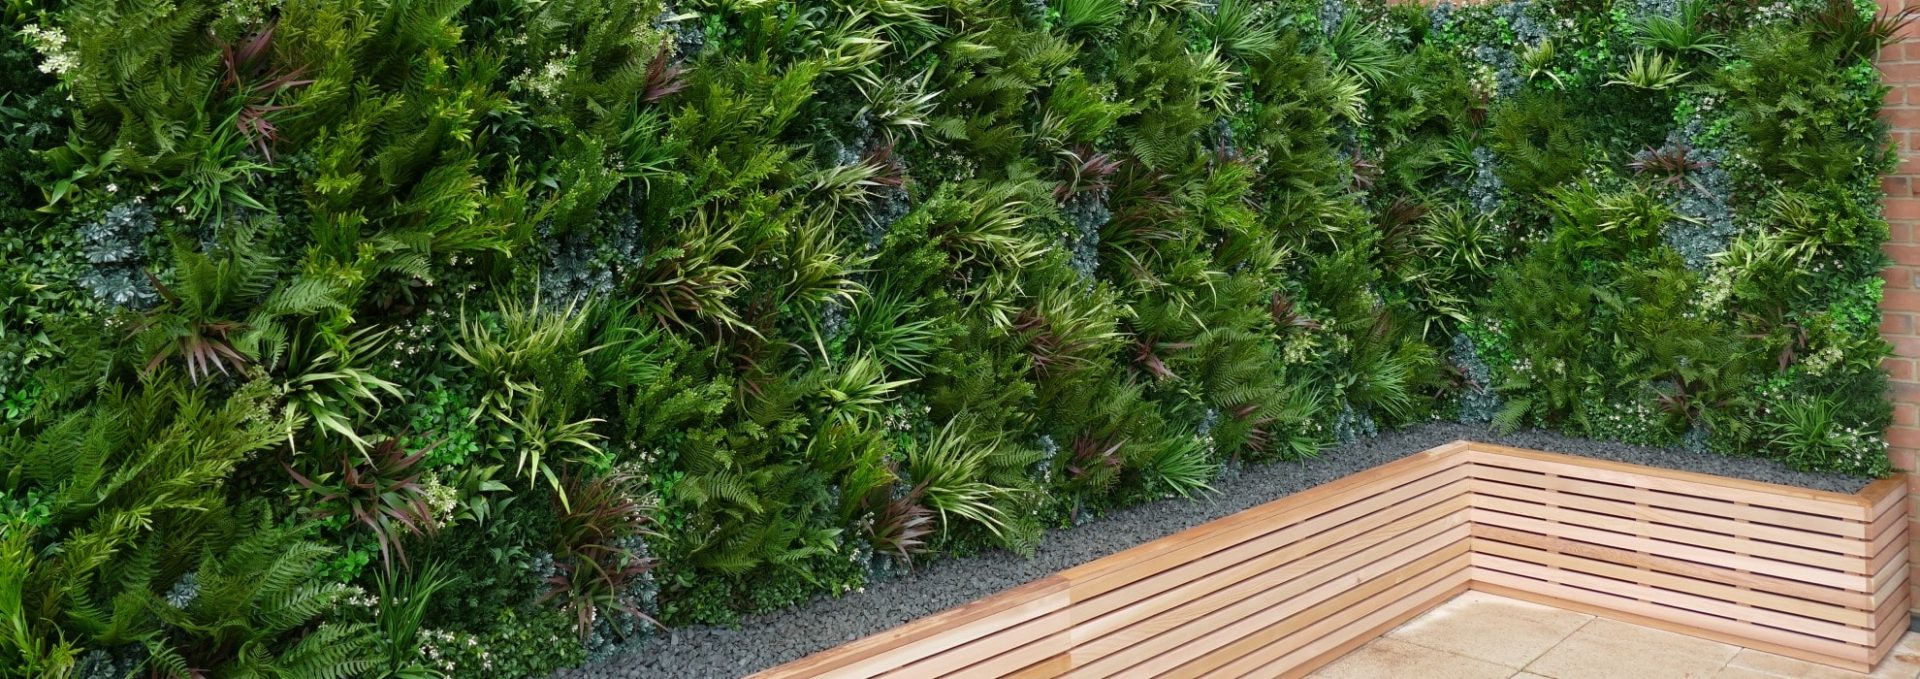 Architectural Green Wall Design